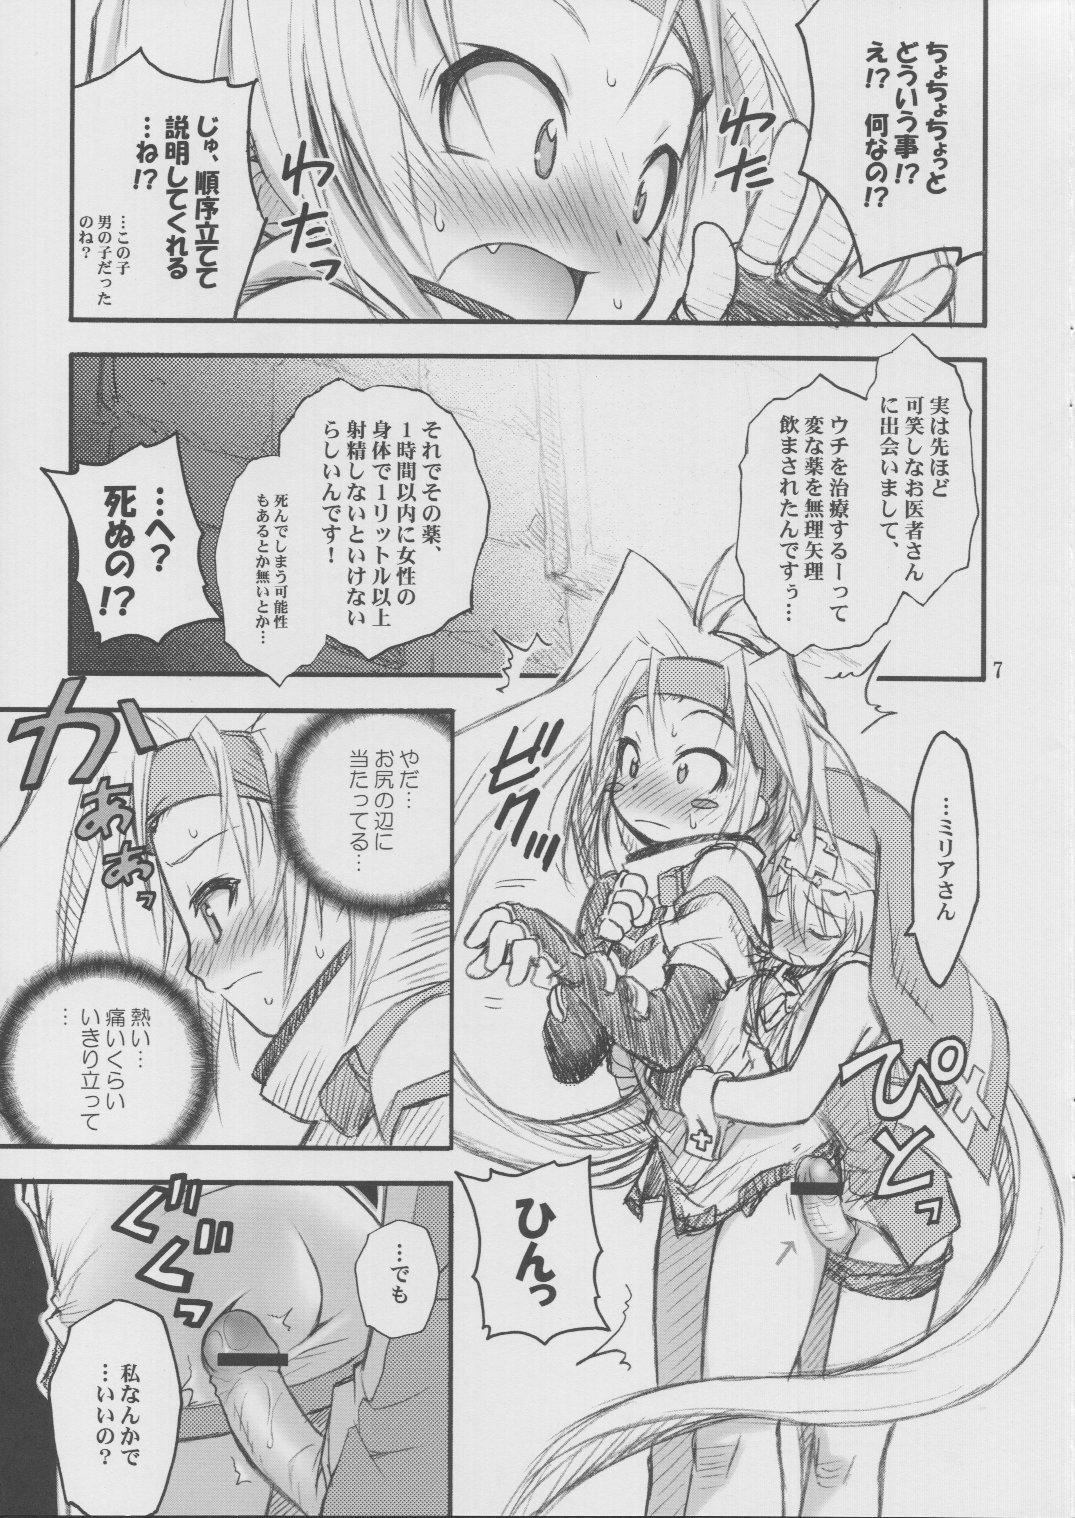 Submissive Anone. - Guilty gear Alternative - Page 6